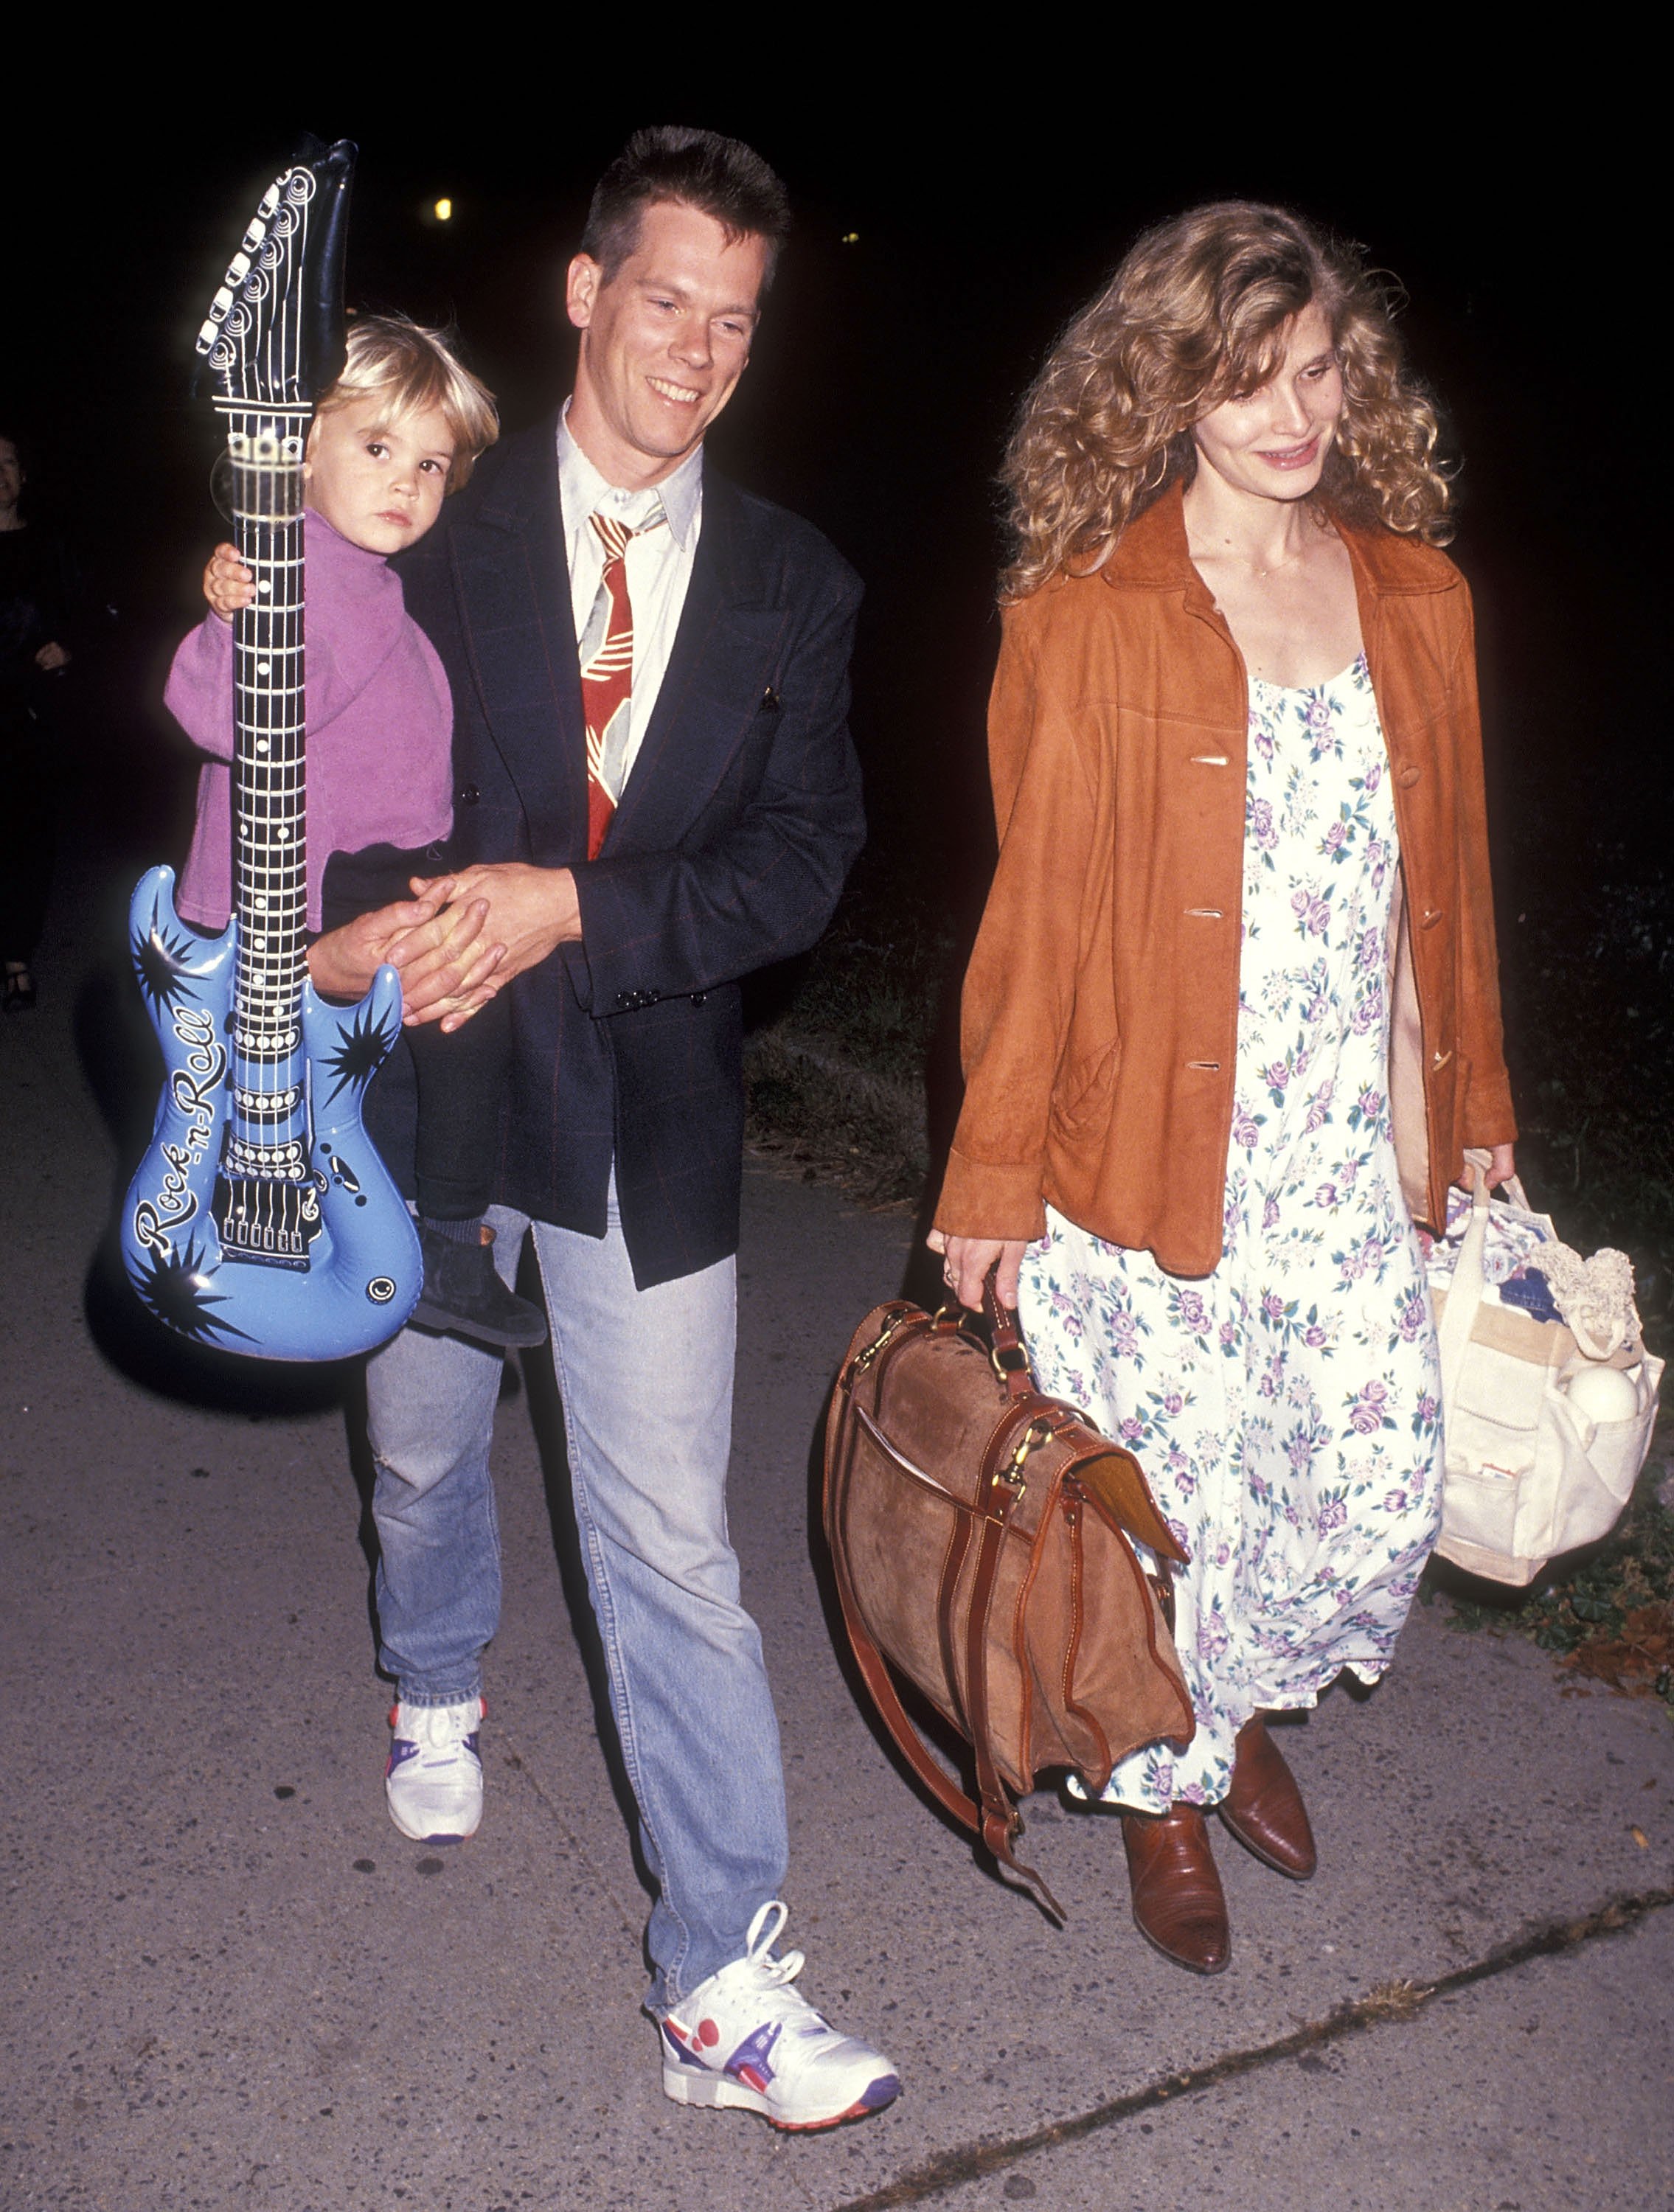 Actor Kevin Bacon with his wife, actress Kyra Sedgwick, and their son, Travis Bacon, attending the Big Apple Circus Special Performance at Damrosch Park, Lincoln Center on October 25, 1991 in New York City ┃Source: Getty Images